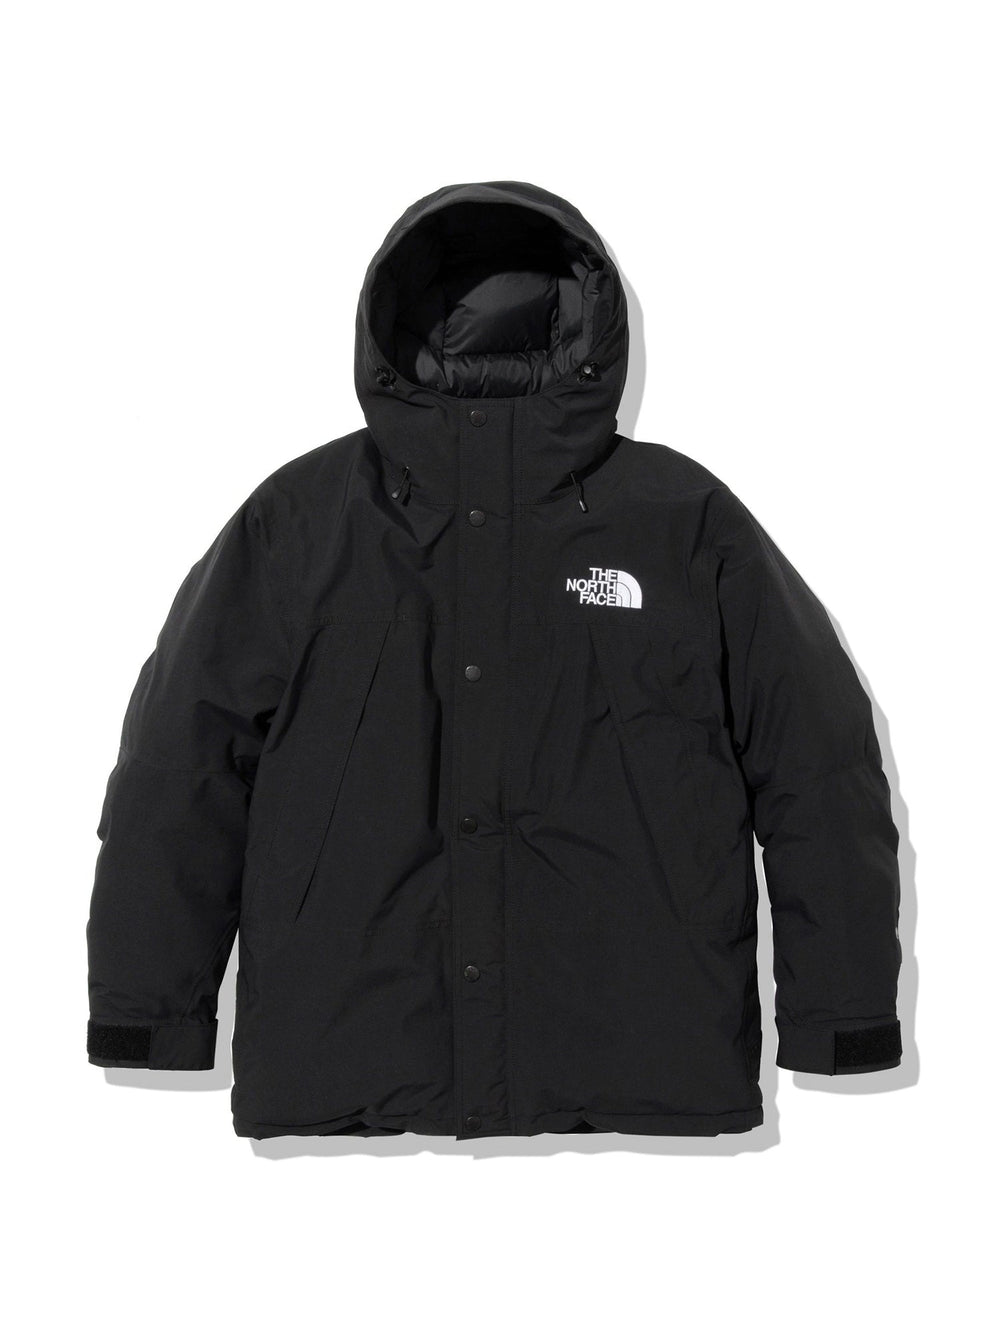 THE NORTH FACE] Mountain Down Jacket / The North Face Unisex 